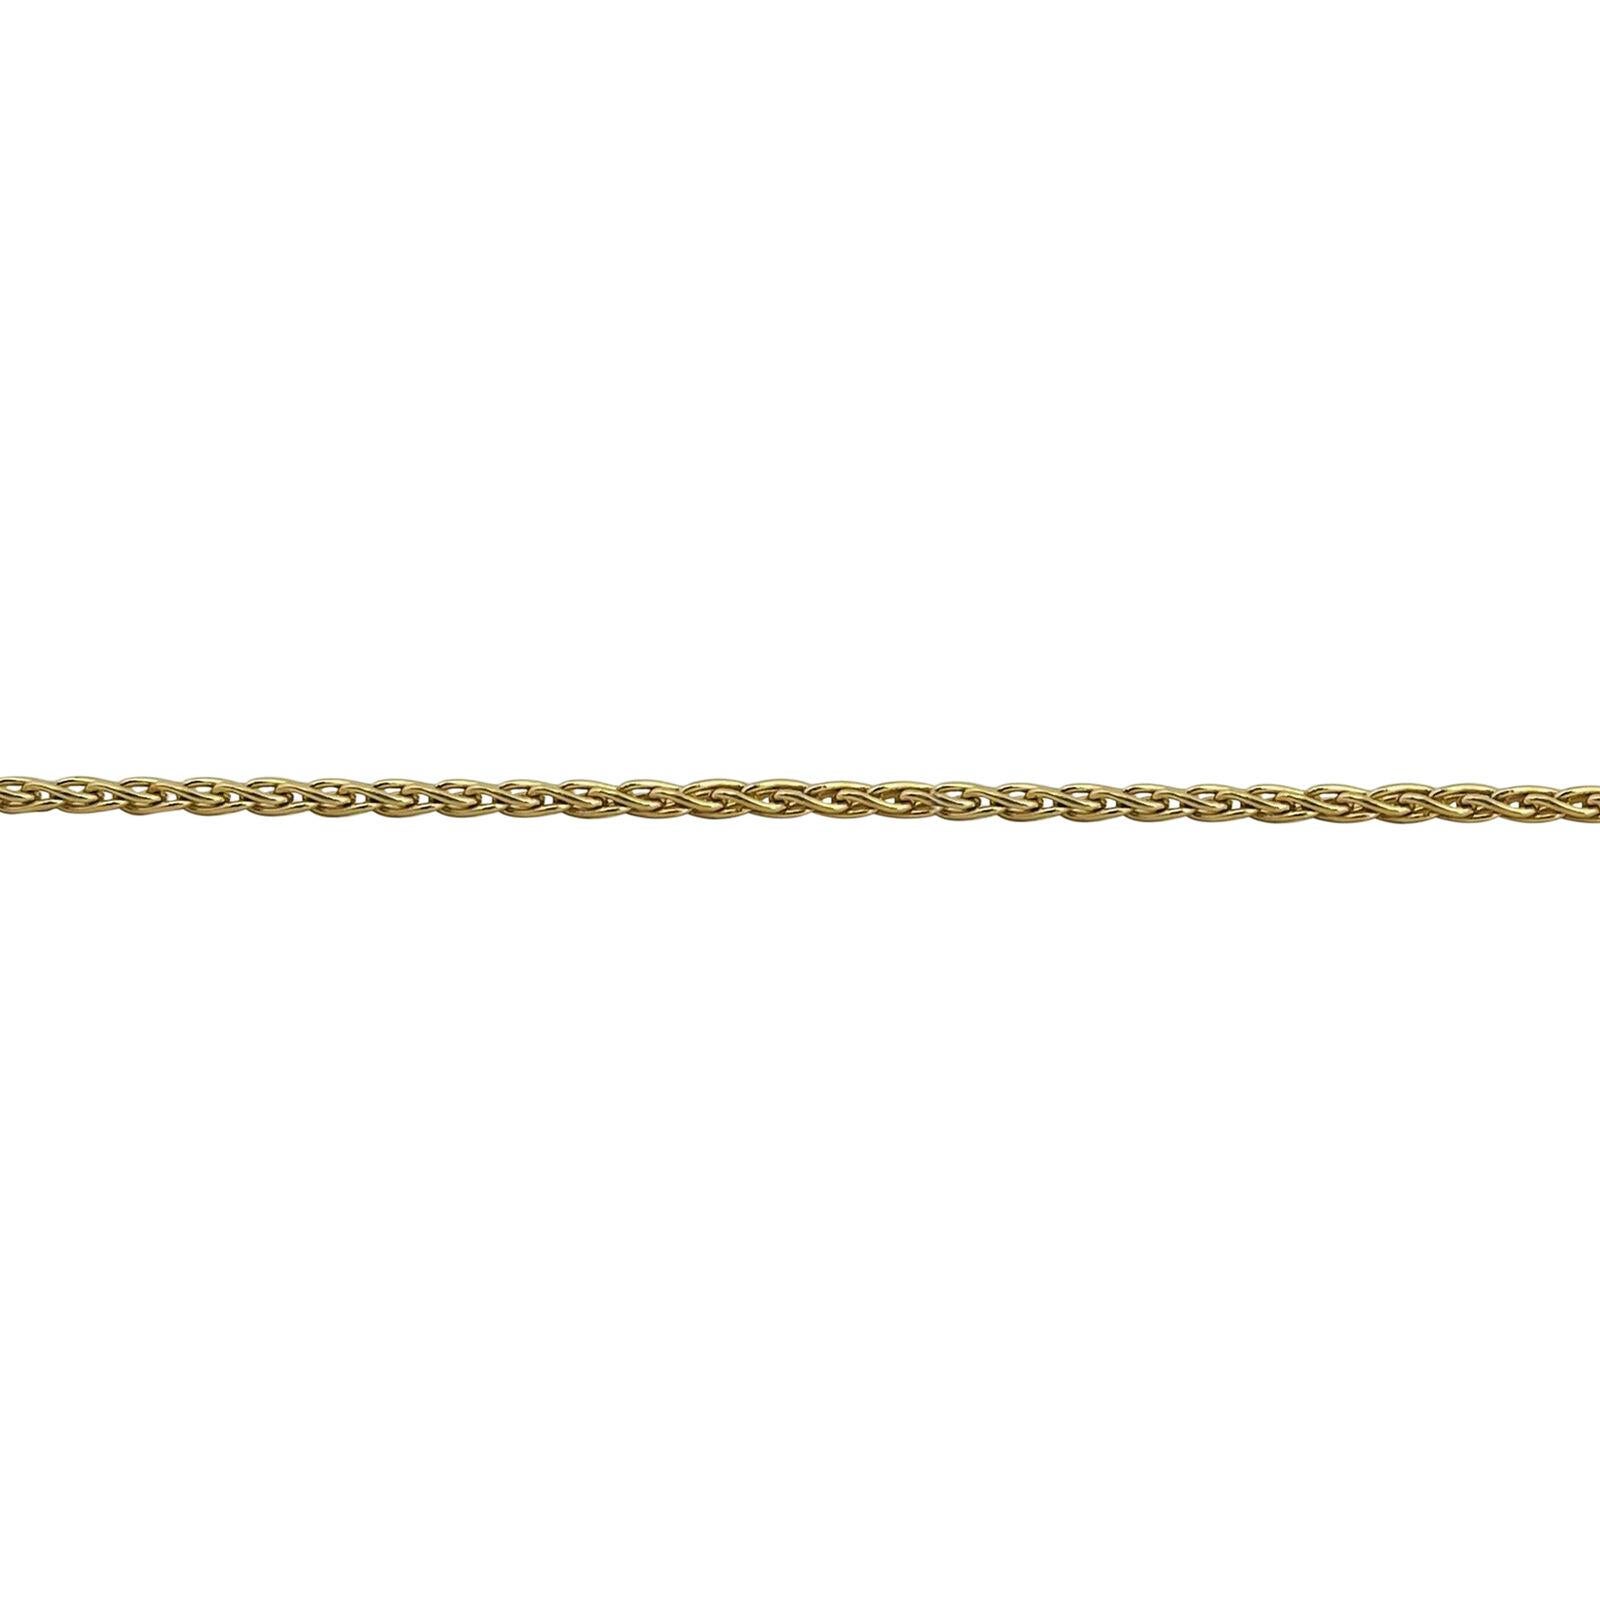 Women's or Men's 14 Karat Yellow Gold Solid Thin Spiga Wheat Link Chain Necklace 